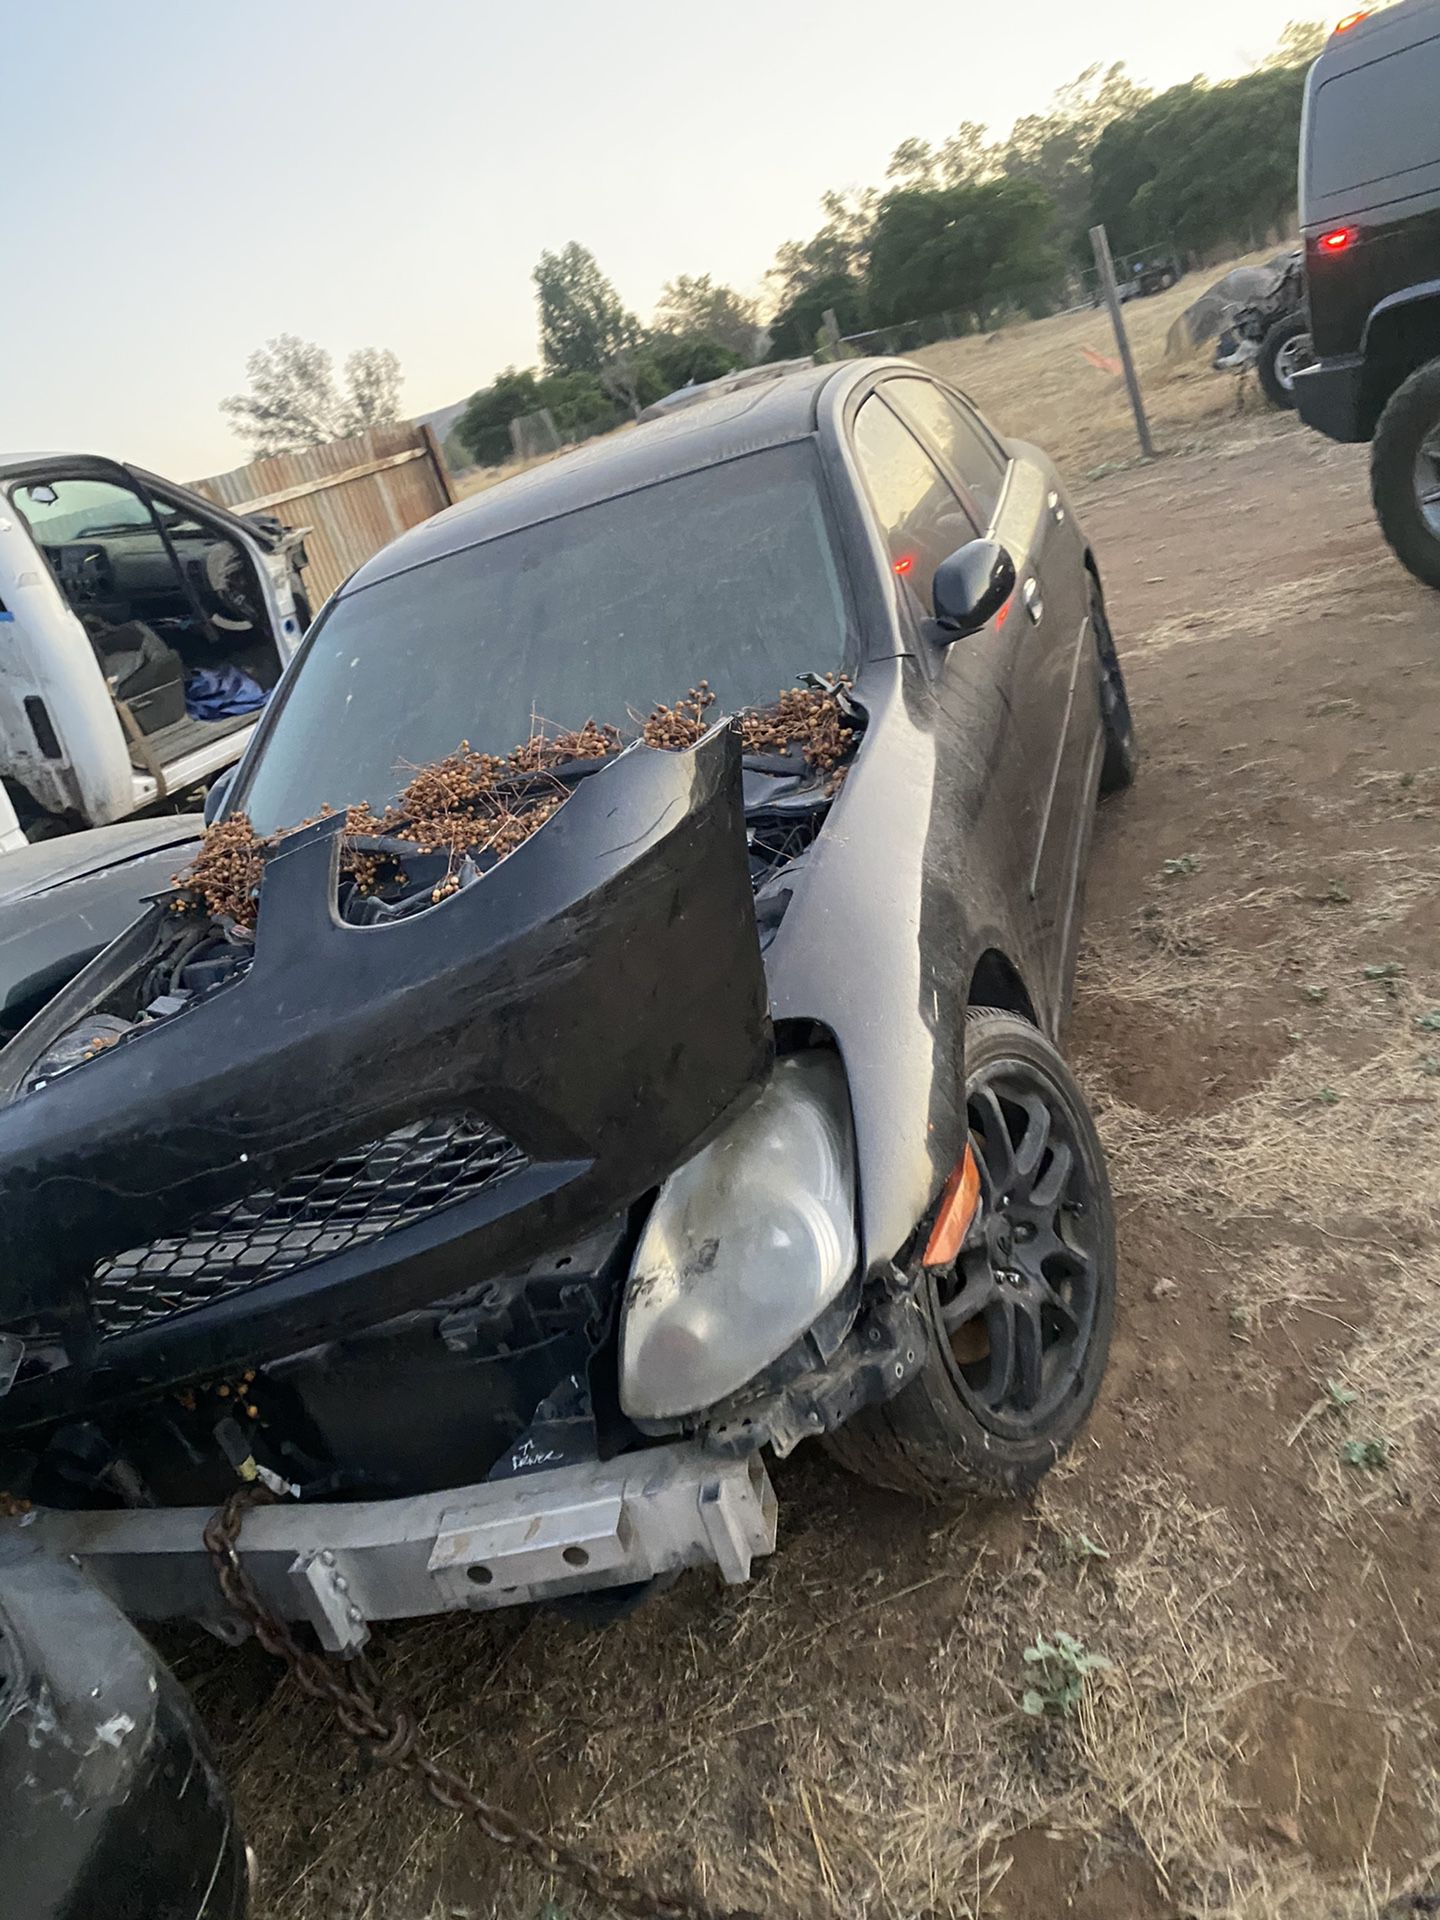 Infinity g35 for parts